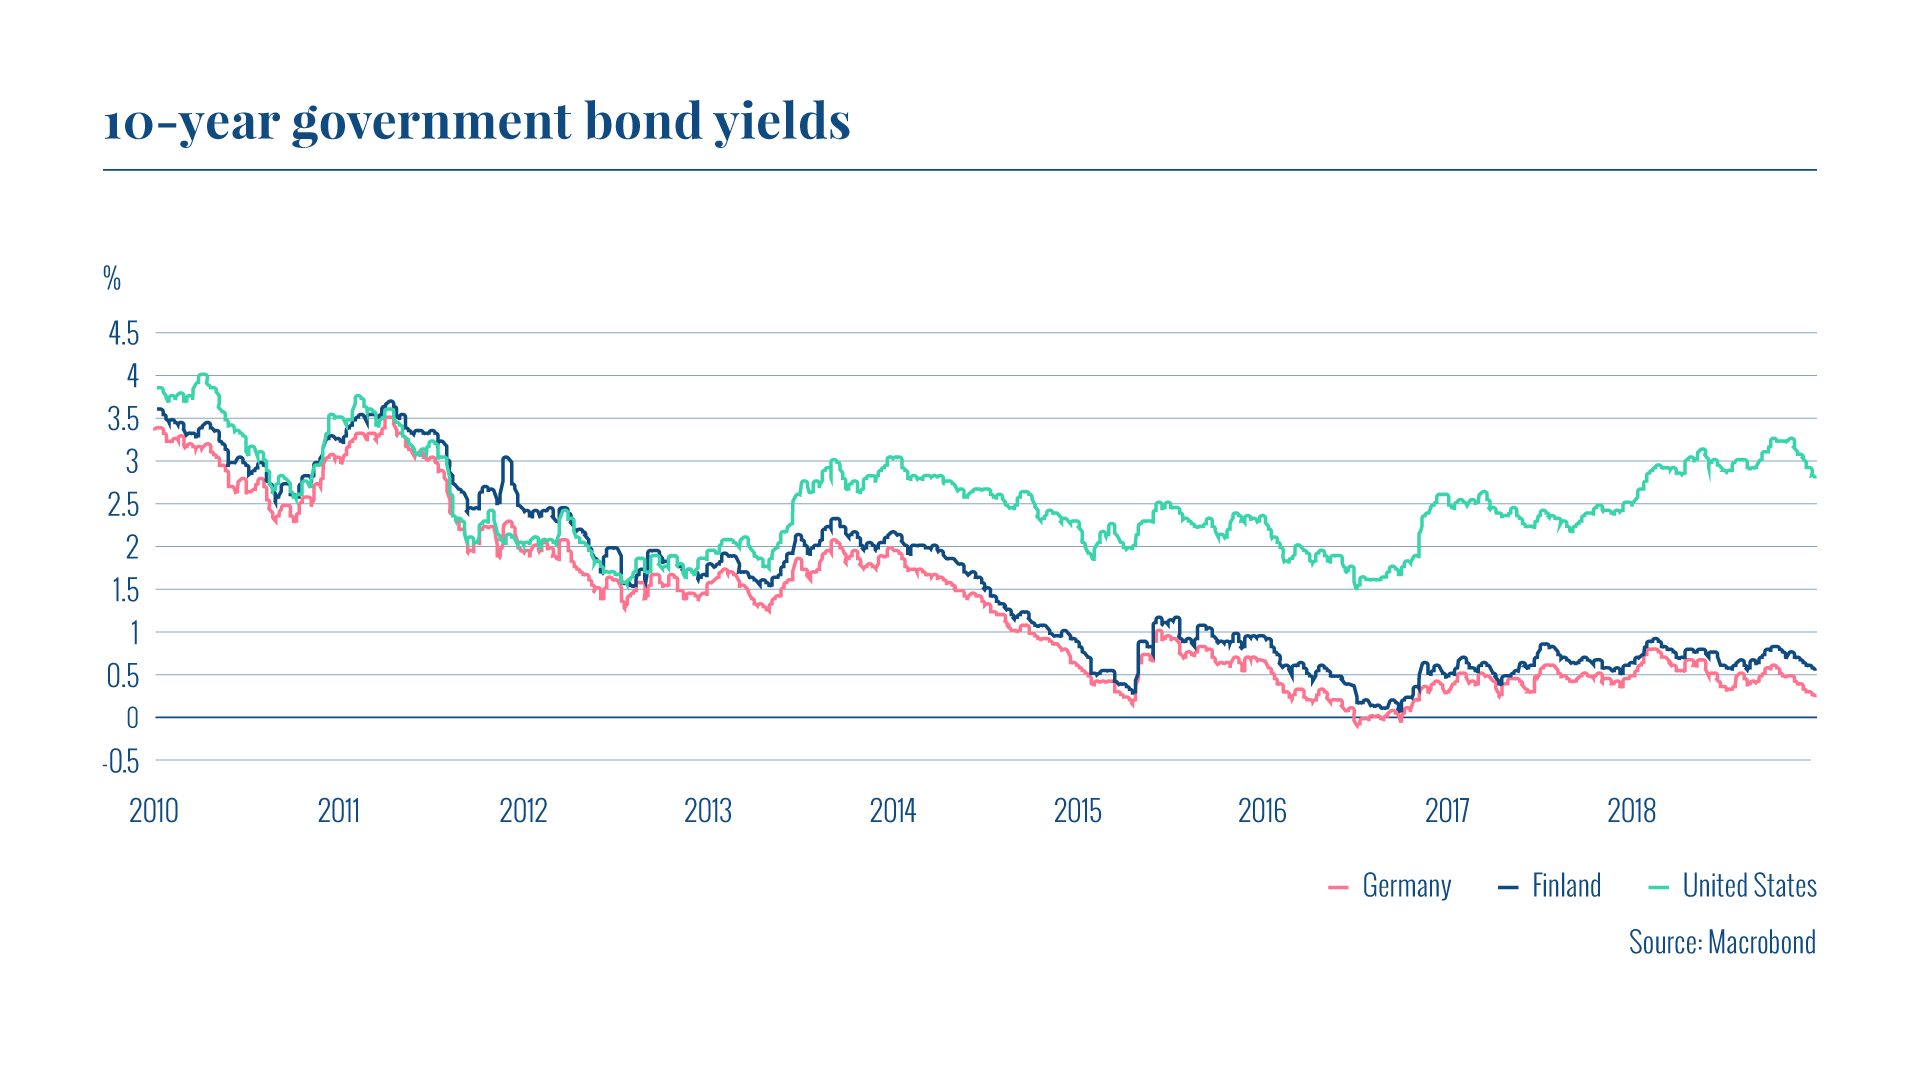 The graph shows the 10-year government bond yields of Germany, Finland and the United States in 2010-18.